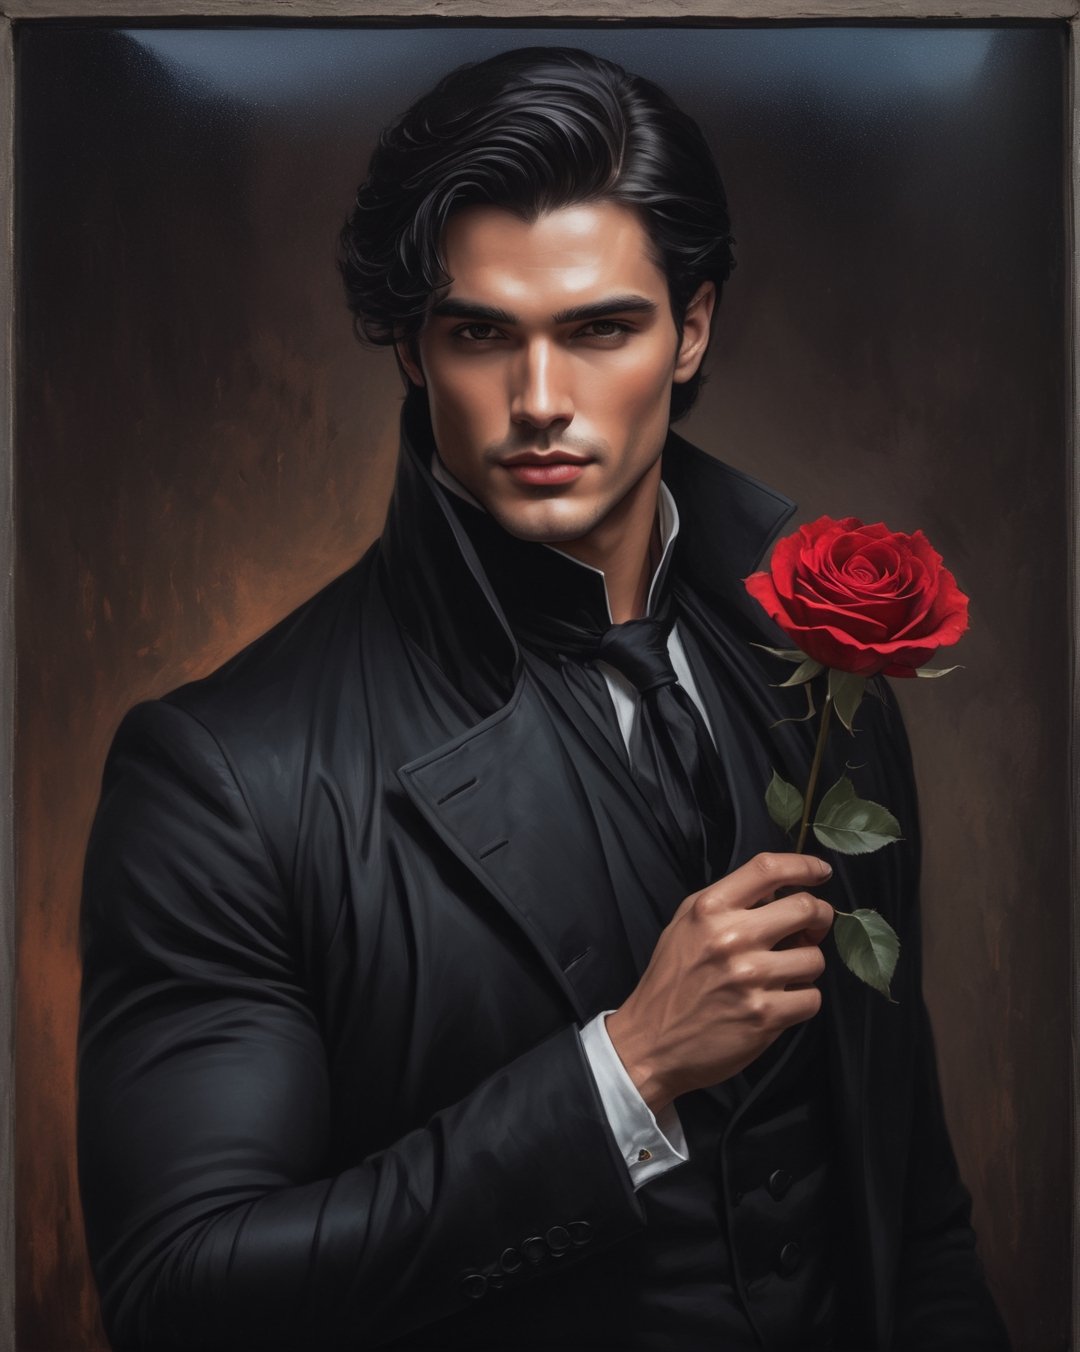 high waist oil painting potarait of handsome man in black magician coat and Black hair ,holding a red rose in hand,dark brown eyes, (((clean shaven))))),character portrait, , wearing white shirt,(((((( tinted glass design background)))))) tinted glass window background,,inspired by Charlie Bowater, & a dark, sk, build body, muscles grainy cinematic, godlyphoto r3al, detailmaster2, aesthetic portrait, cinematic colors, earthy, moody 